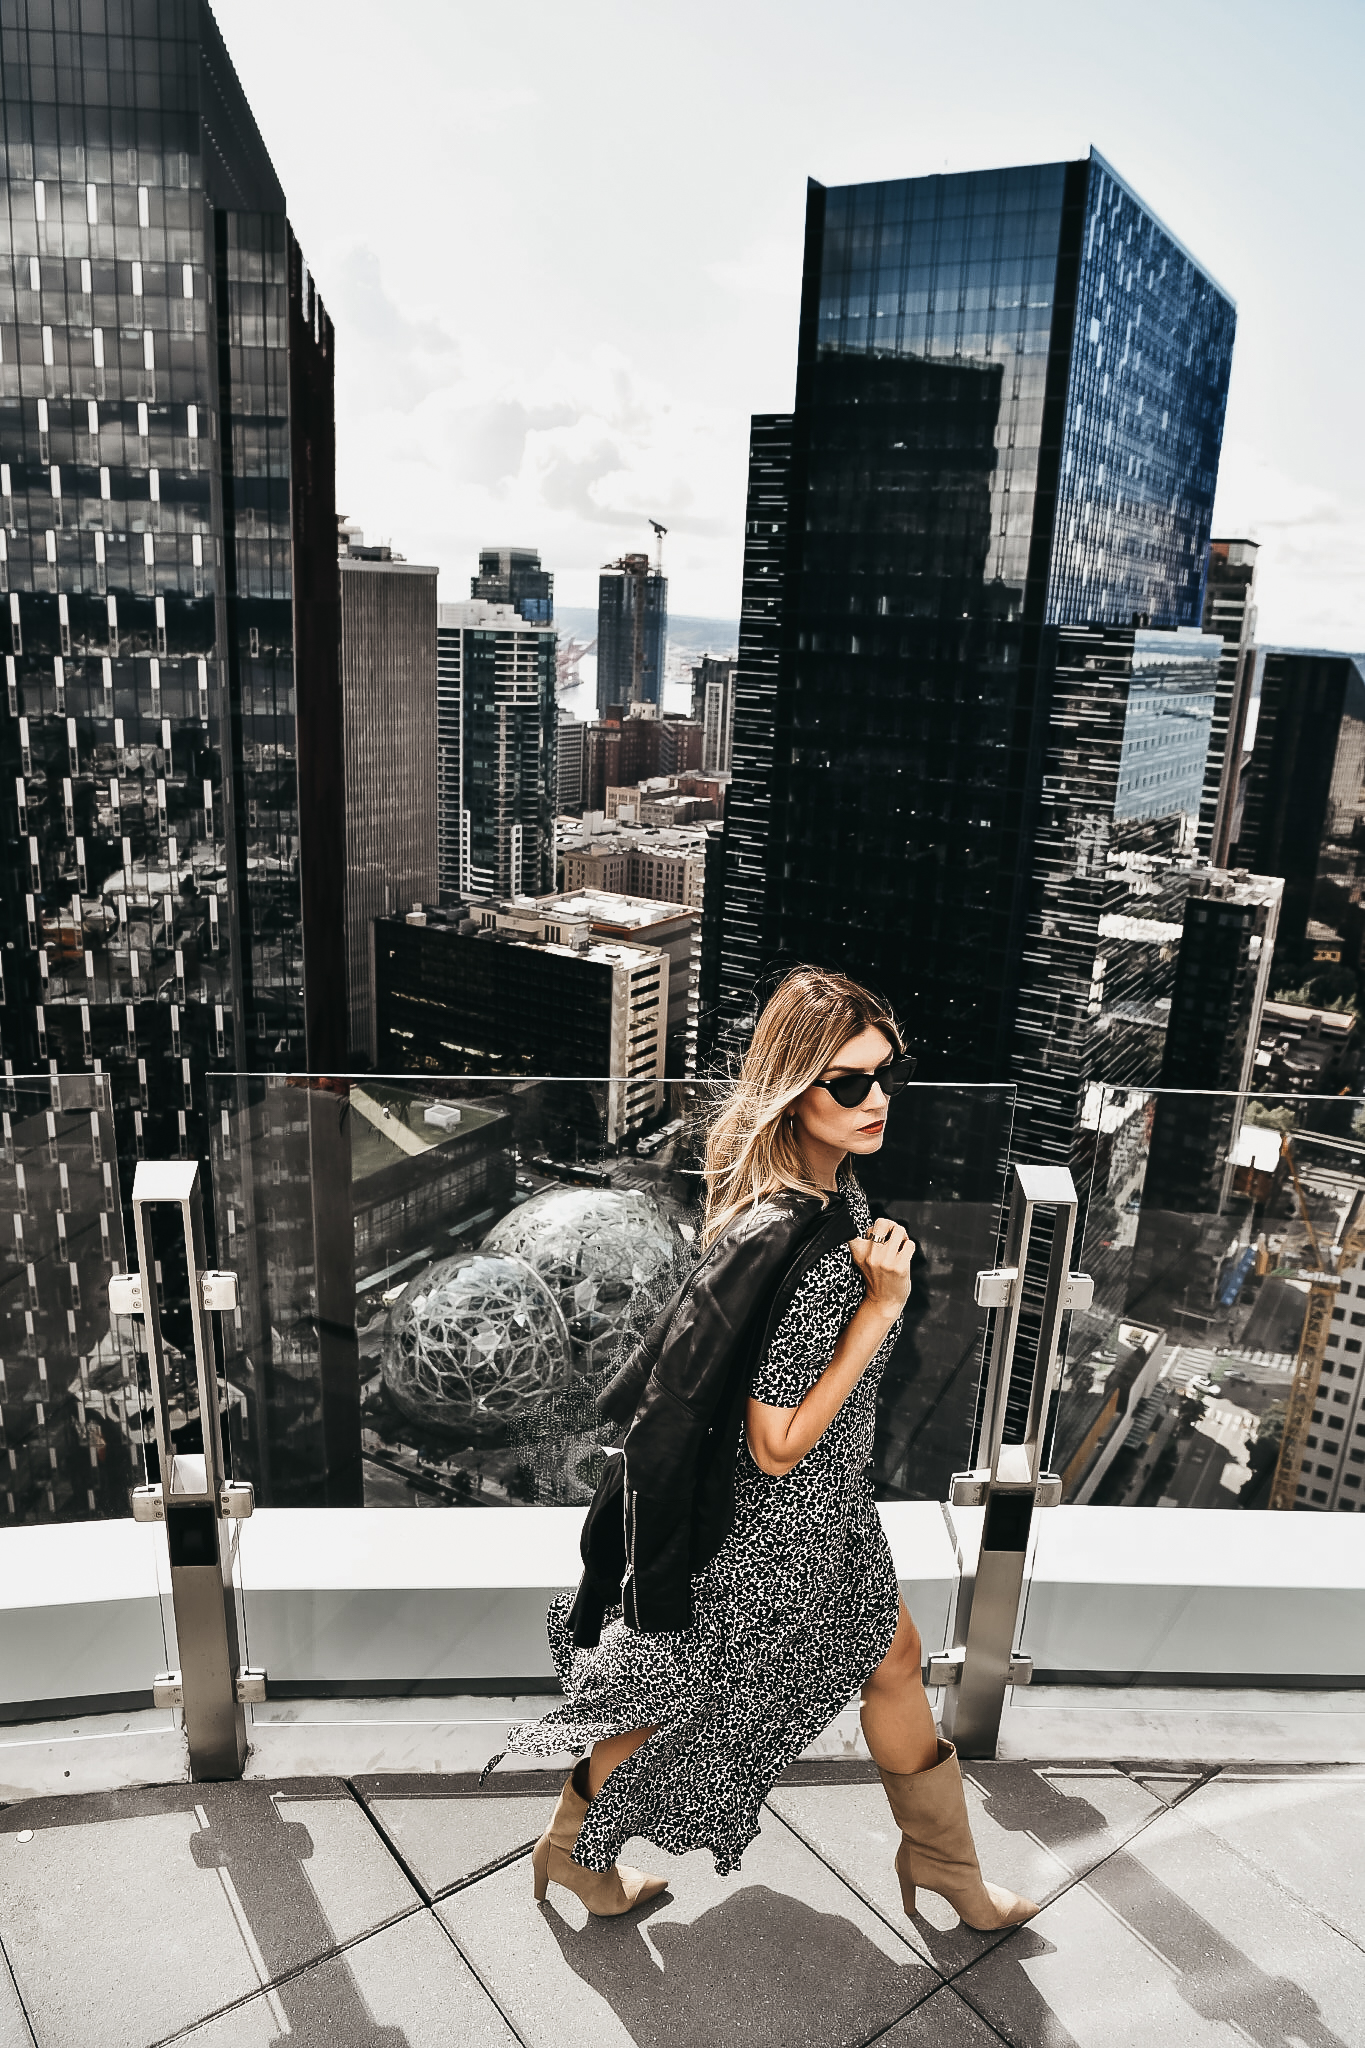 Cortney Bigelow of The Grey Edit - Stylelogue - October Trend Story - Seattle Bloggers - Asymmetrical Fashion - Seattle Rooftop Views